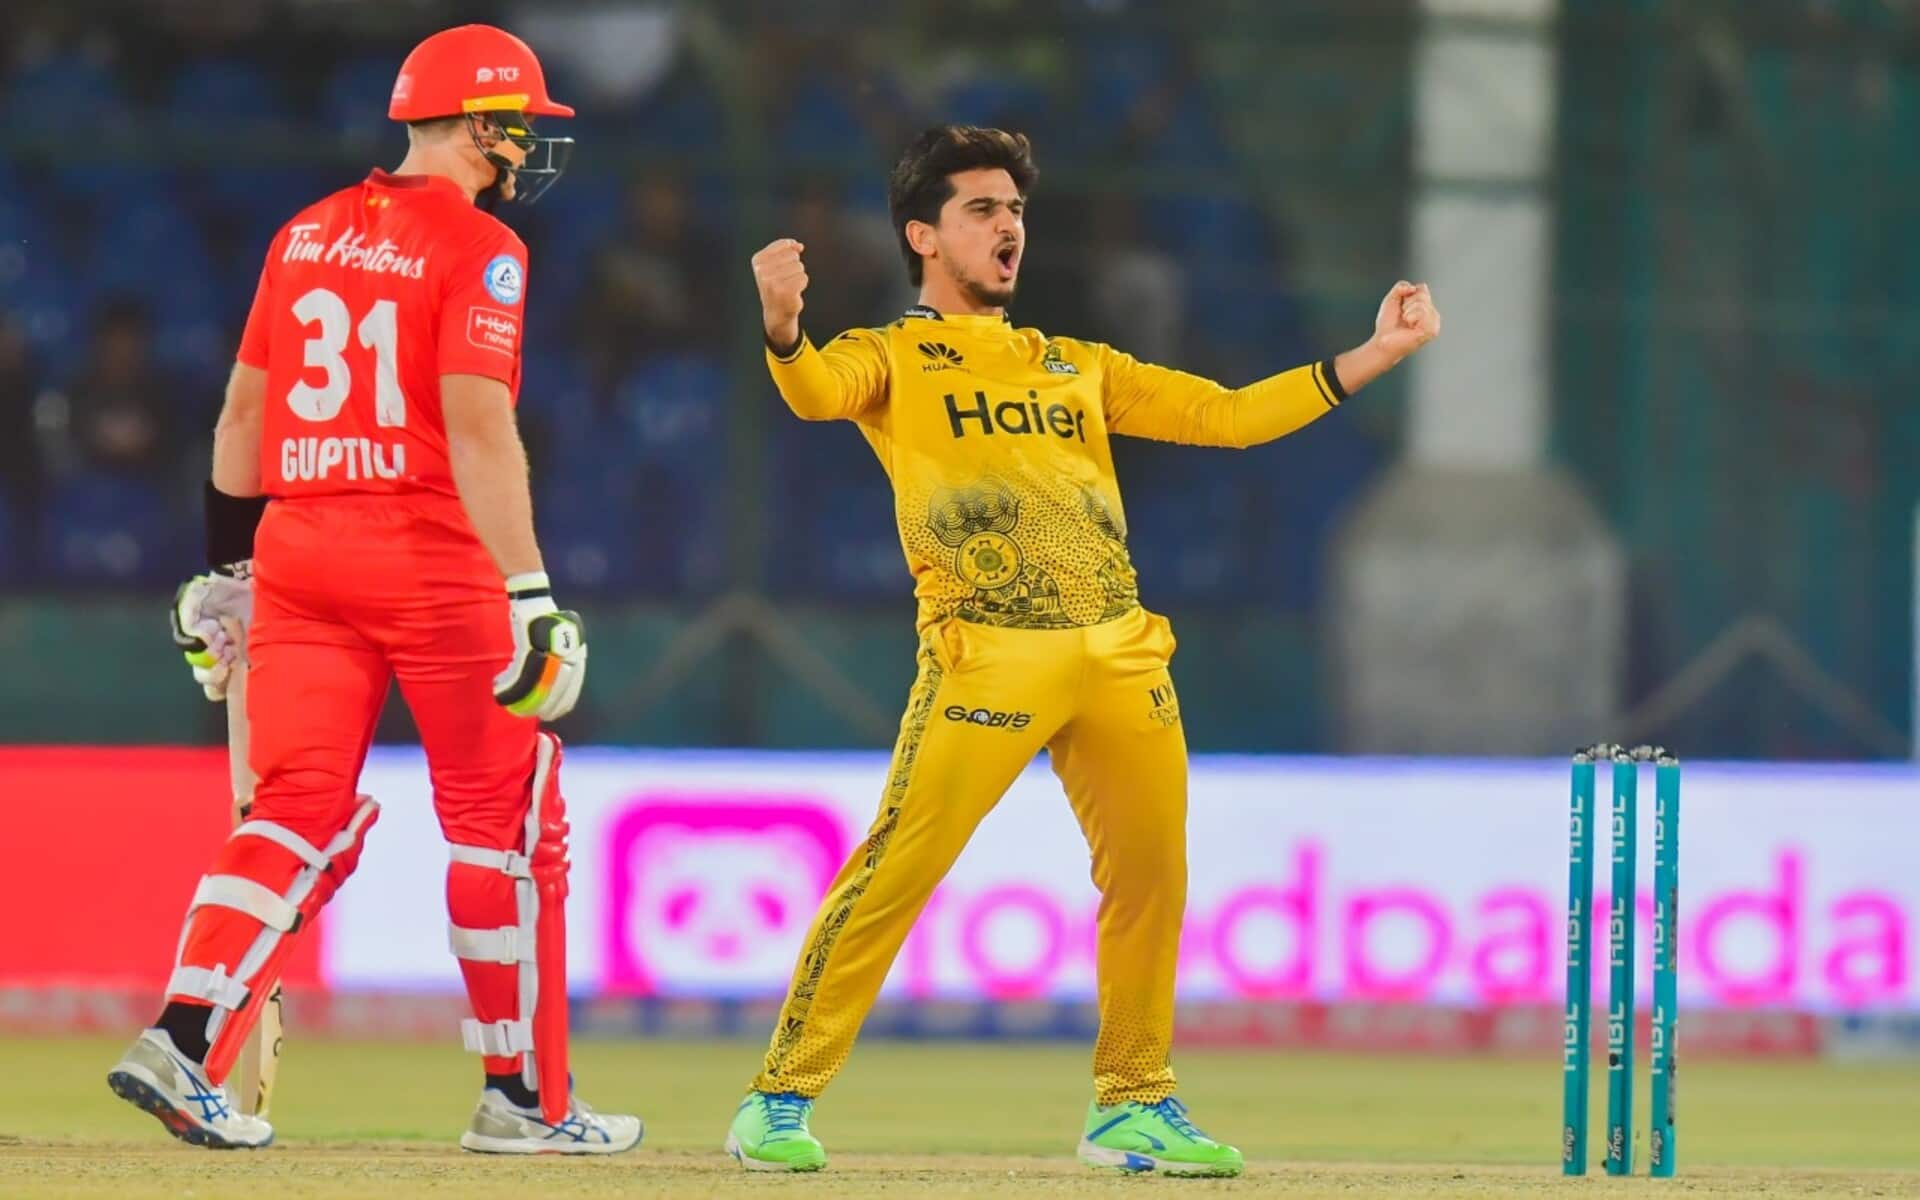 Saim Ayub has delivered with the ball too (Source: PSL/PCB)